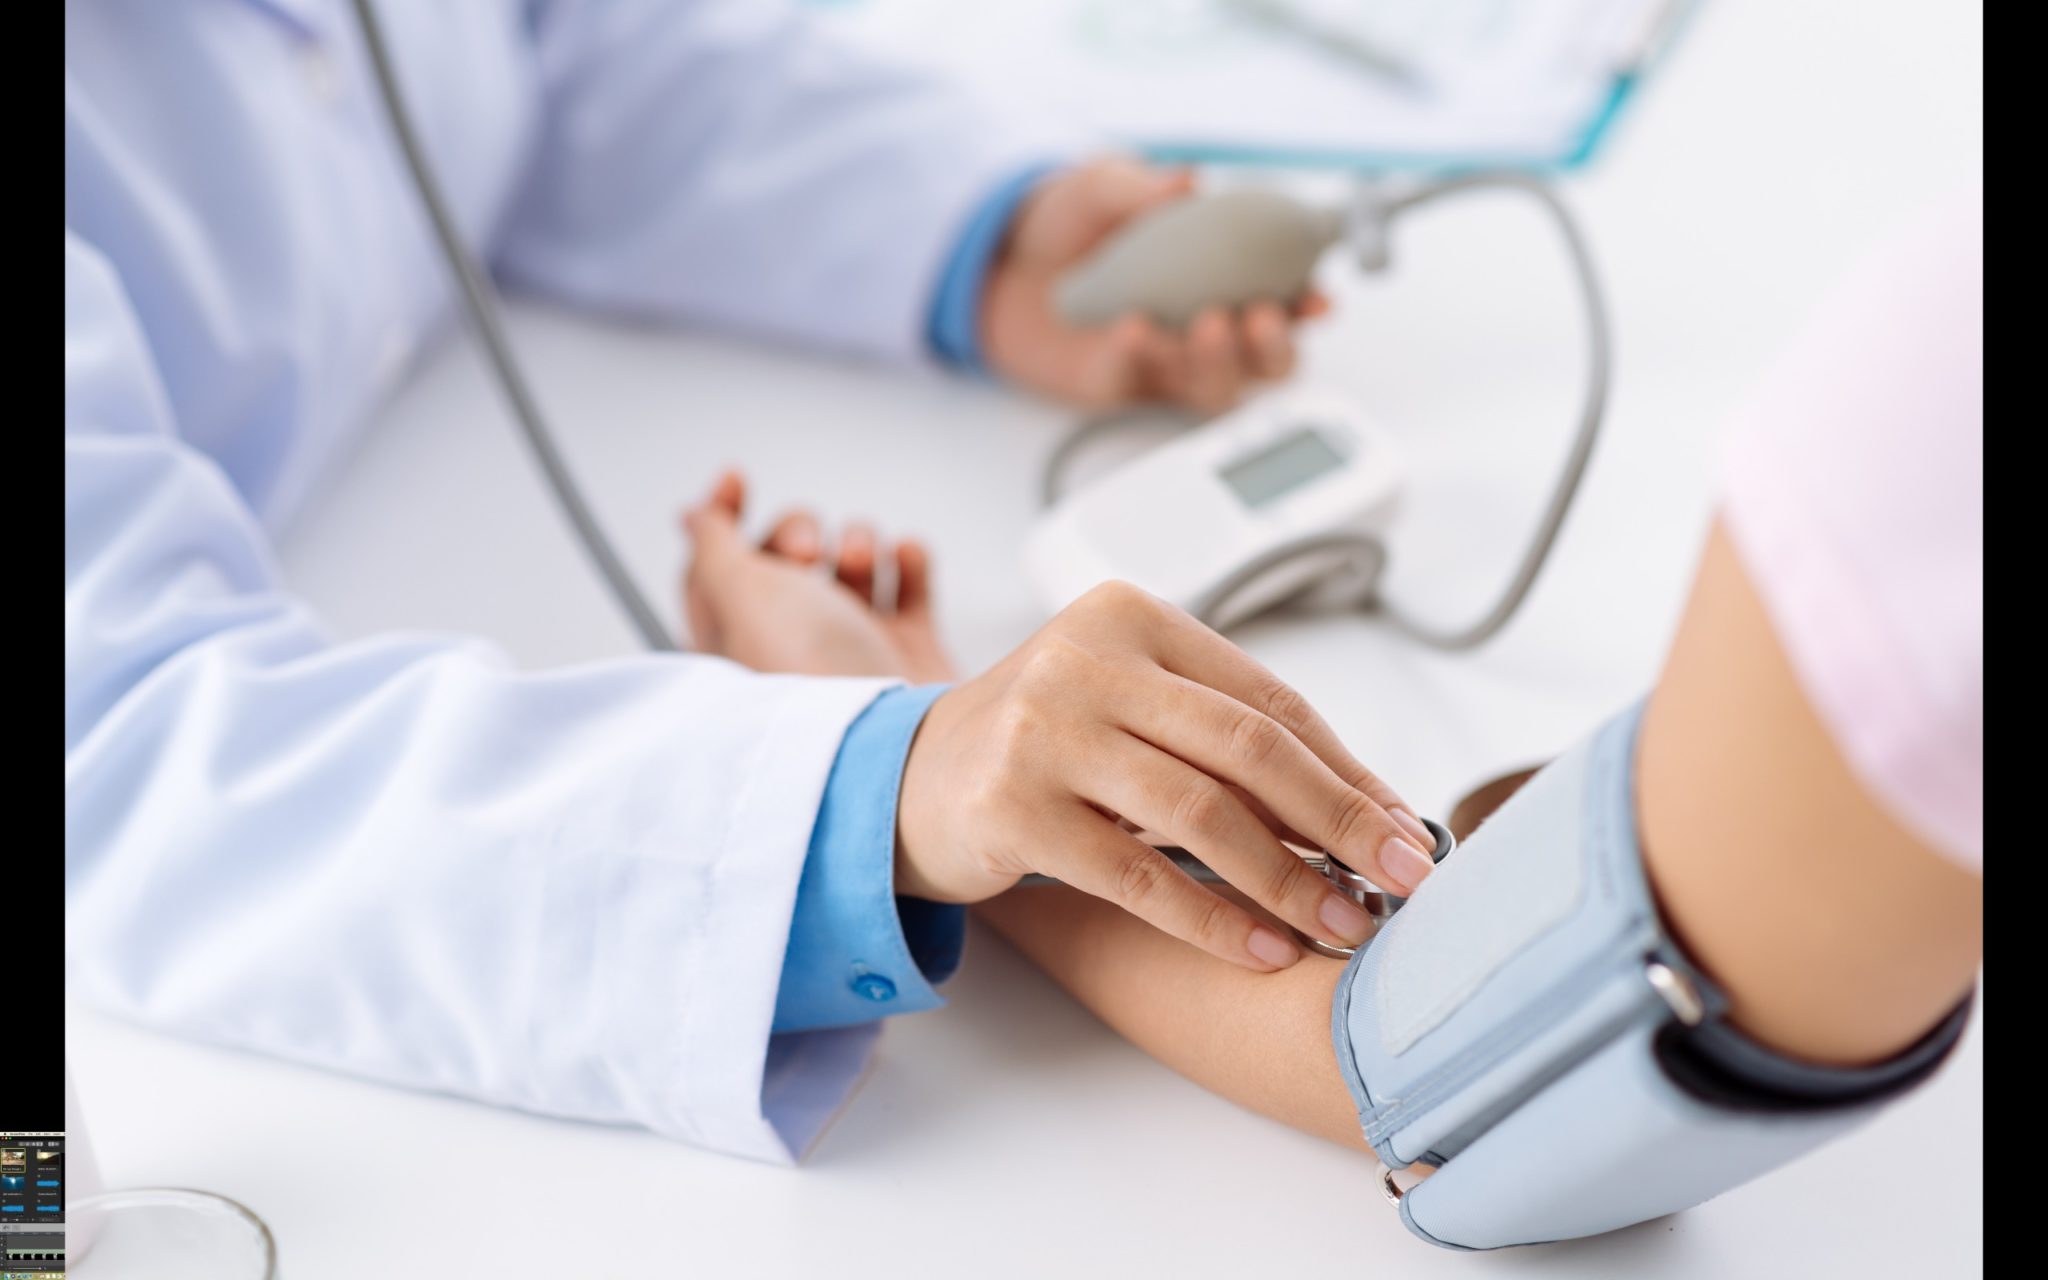 5 Tips and Tricks For Better Blood Pressure Control